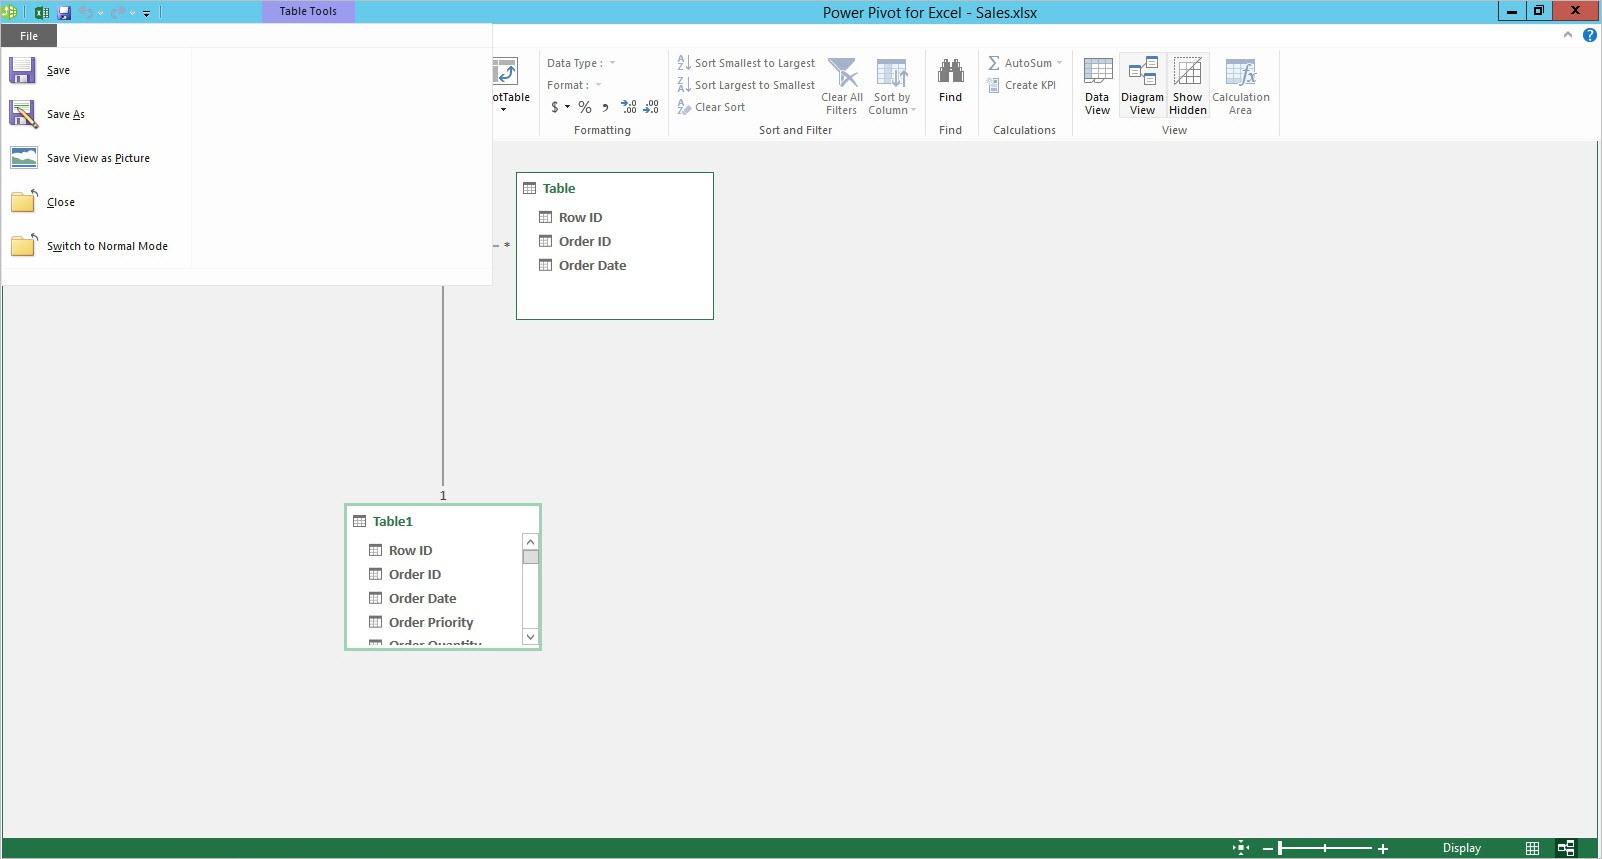 MS Access 2016 Saving Relationships New-feature-updates-for-Power-Pivot-in-Excel-2016-1d.jpg